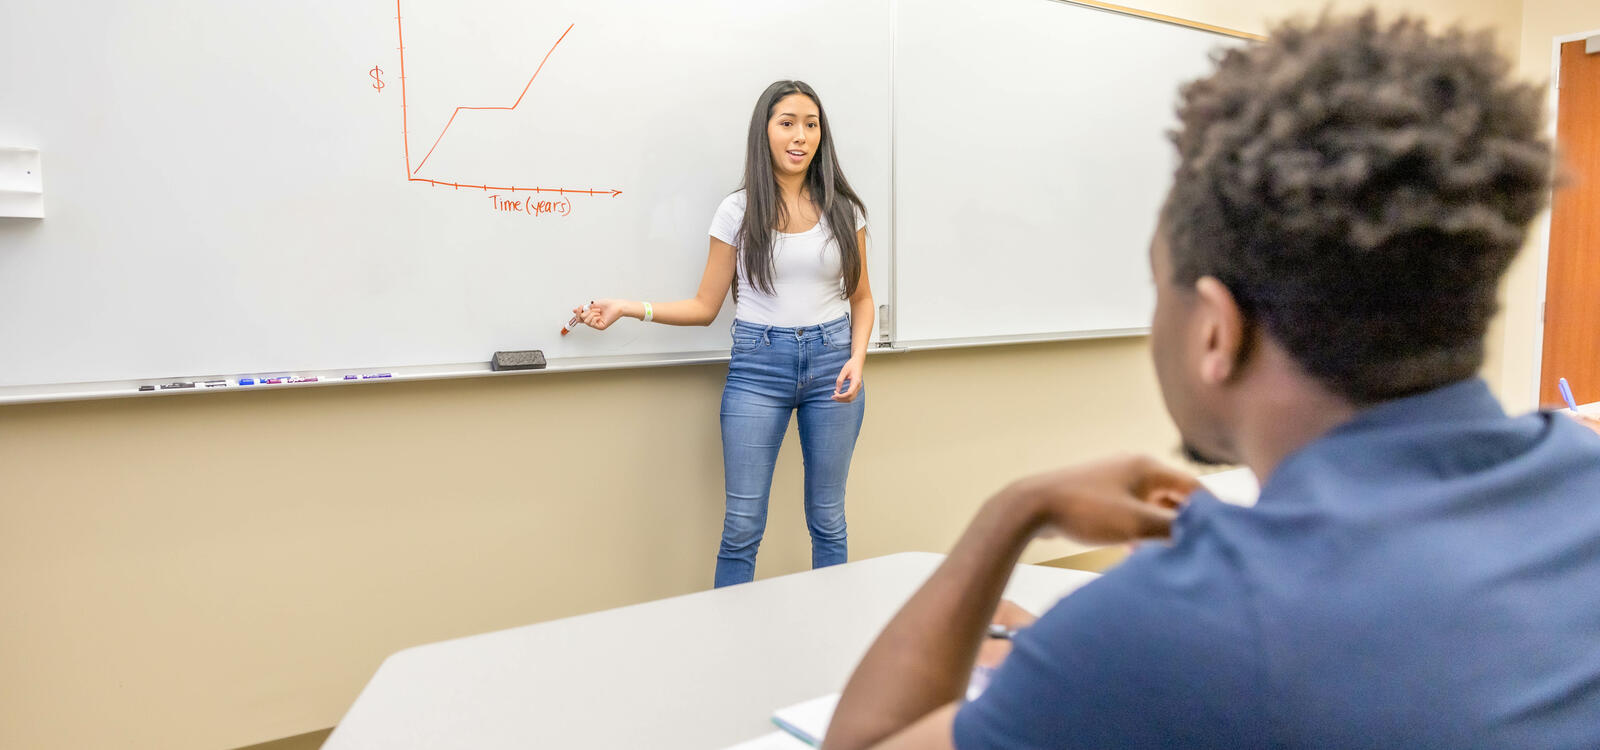 Women points to white board with graph explaining it to a student seated at a desk